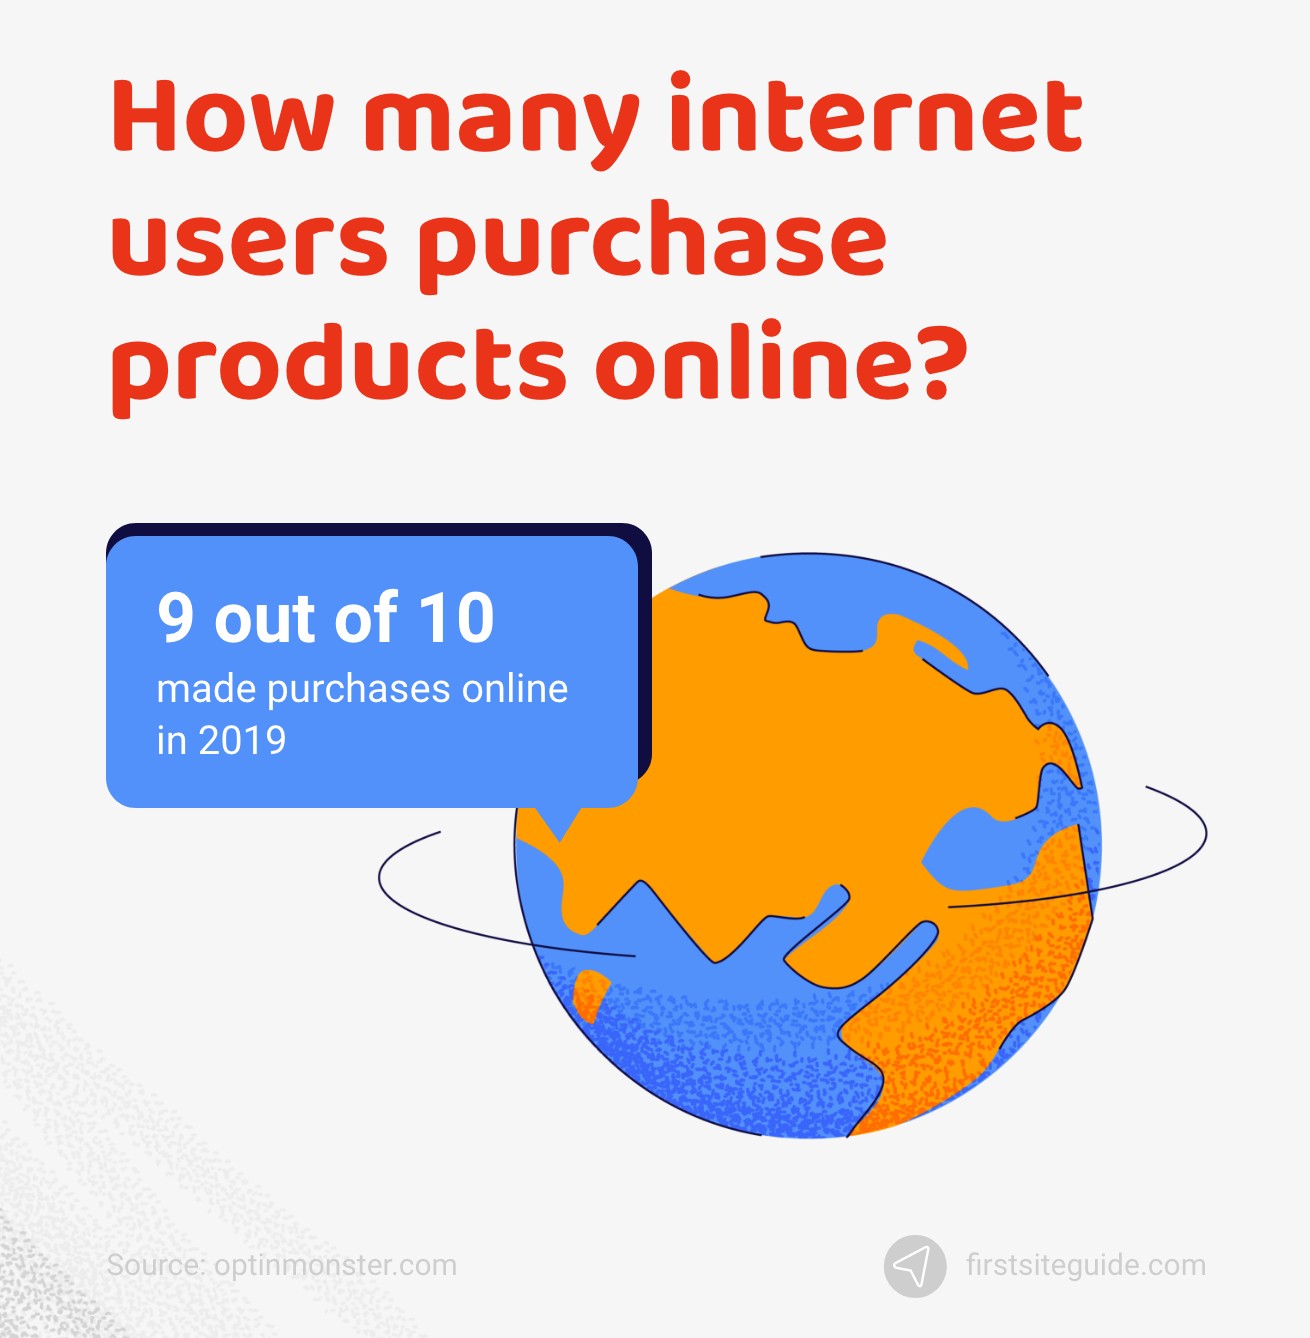 How many internet users purchase products online